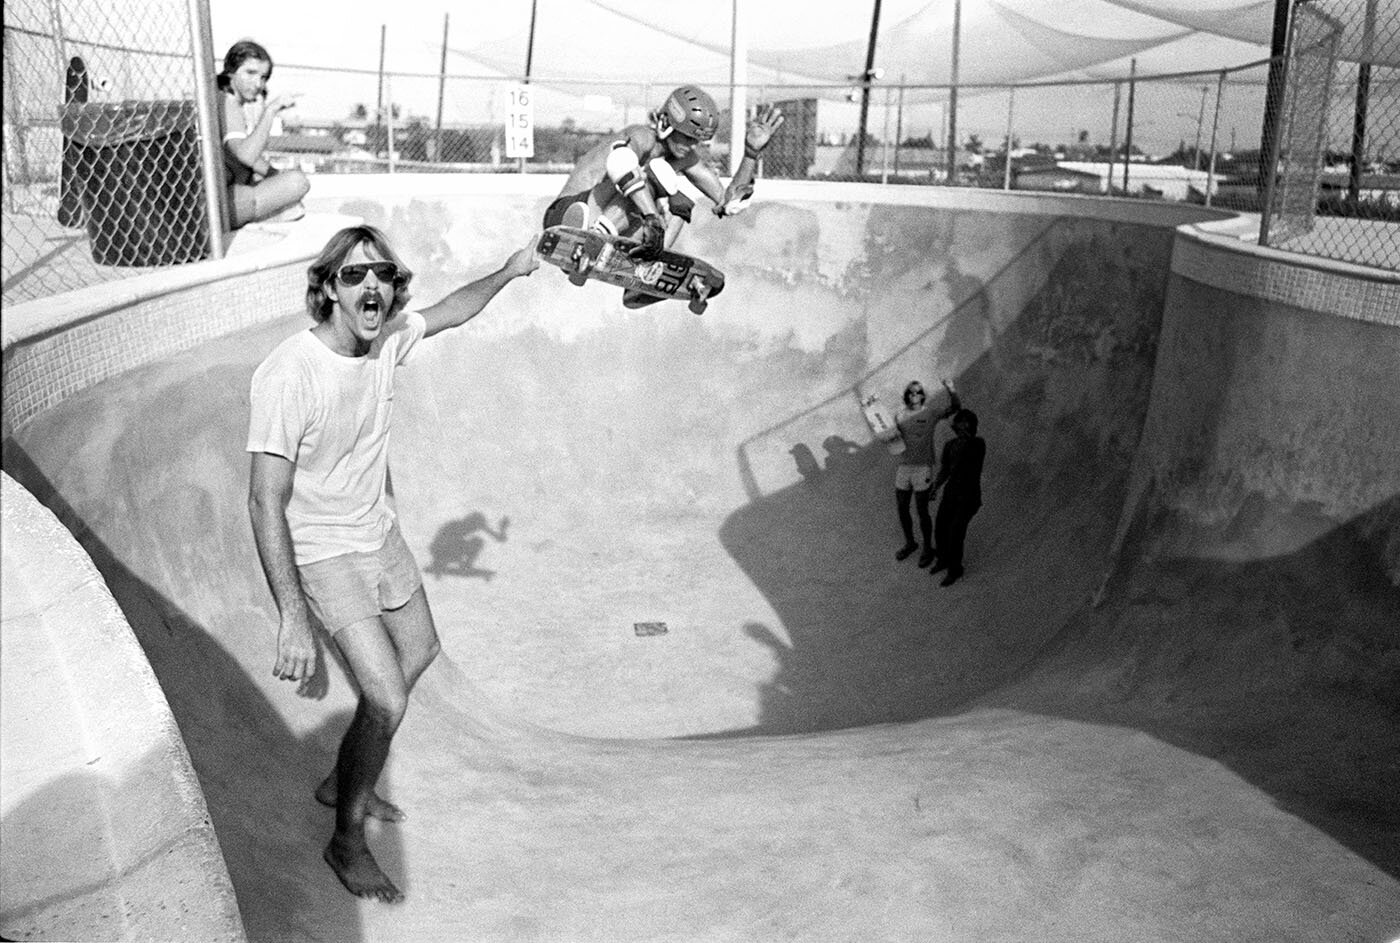 Dan Murray, aerial in the Monster Hole, with Frank Nasworthy in the foreground, Cadillac Wheels Skateboard Concourse, Lighthouse Point, Florida, 1978. _Craig Snyder